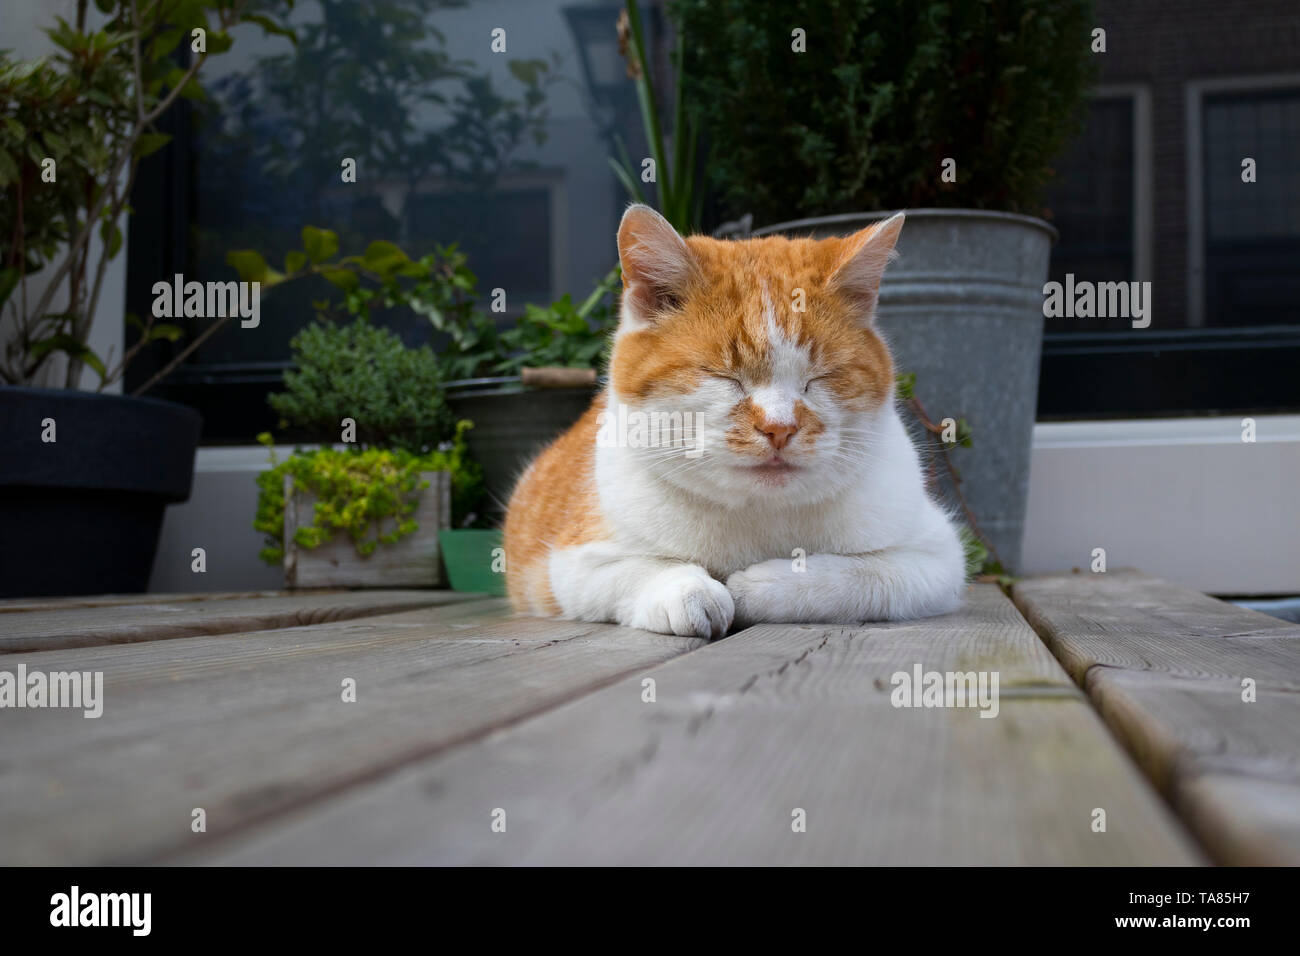 Relaxed sleeping red and white cat on a wooden garden table Stock Photo